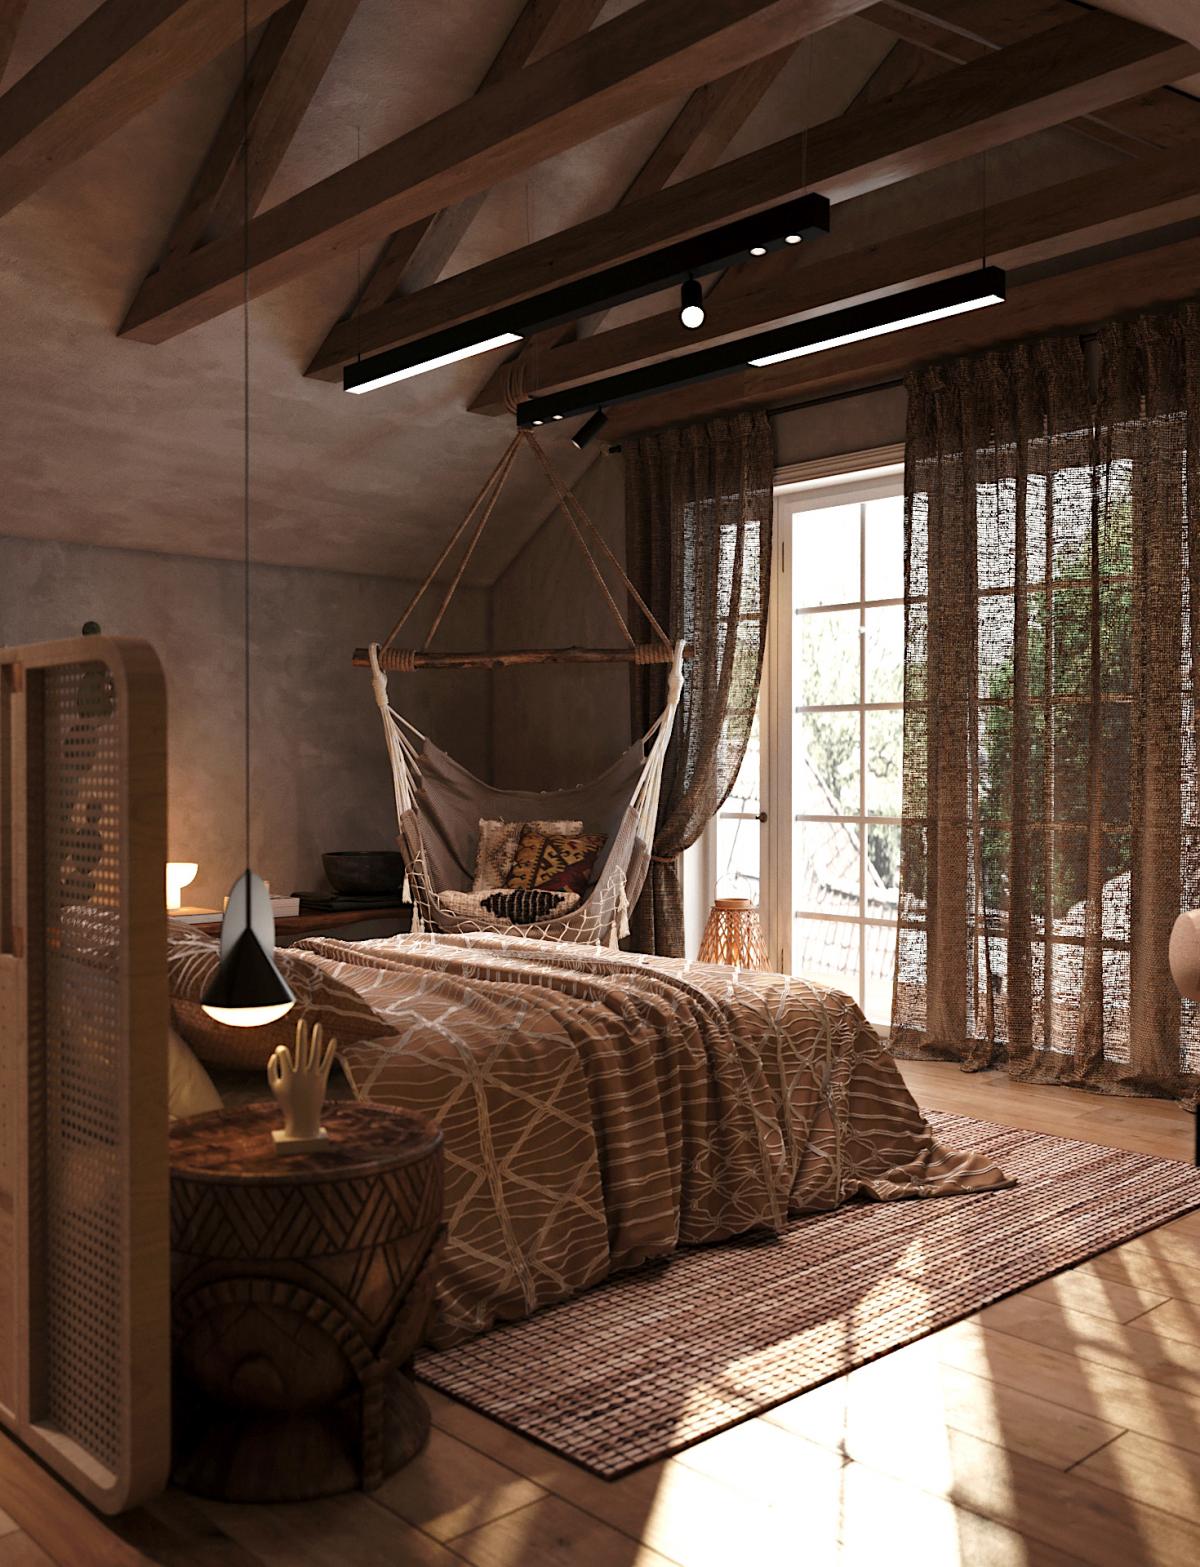 Cozy Aesthetic Design Of The Bedroom When You Want Long Nigh El Style